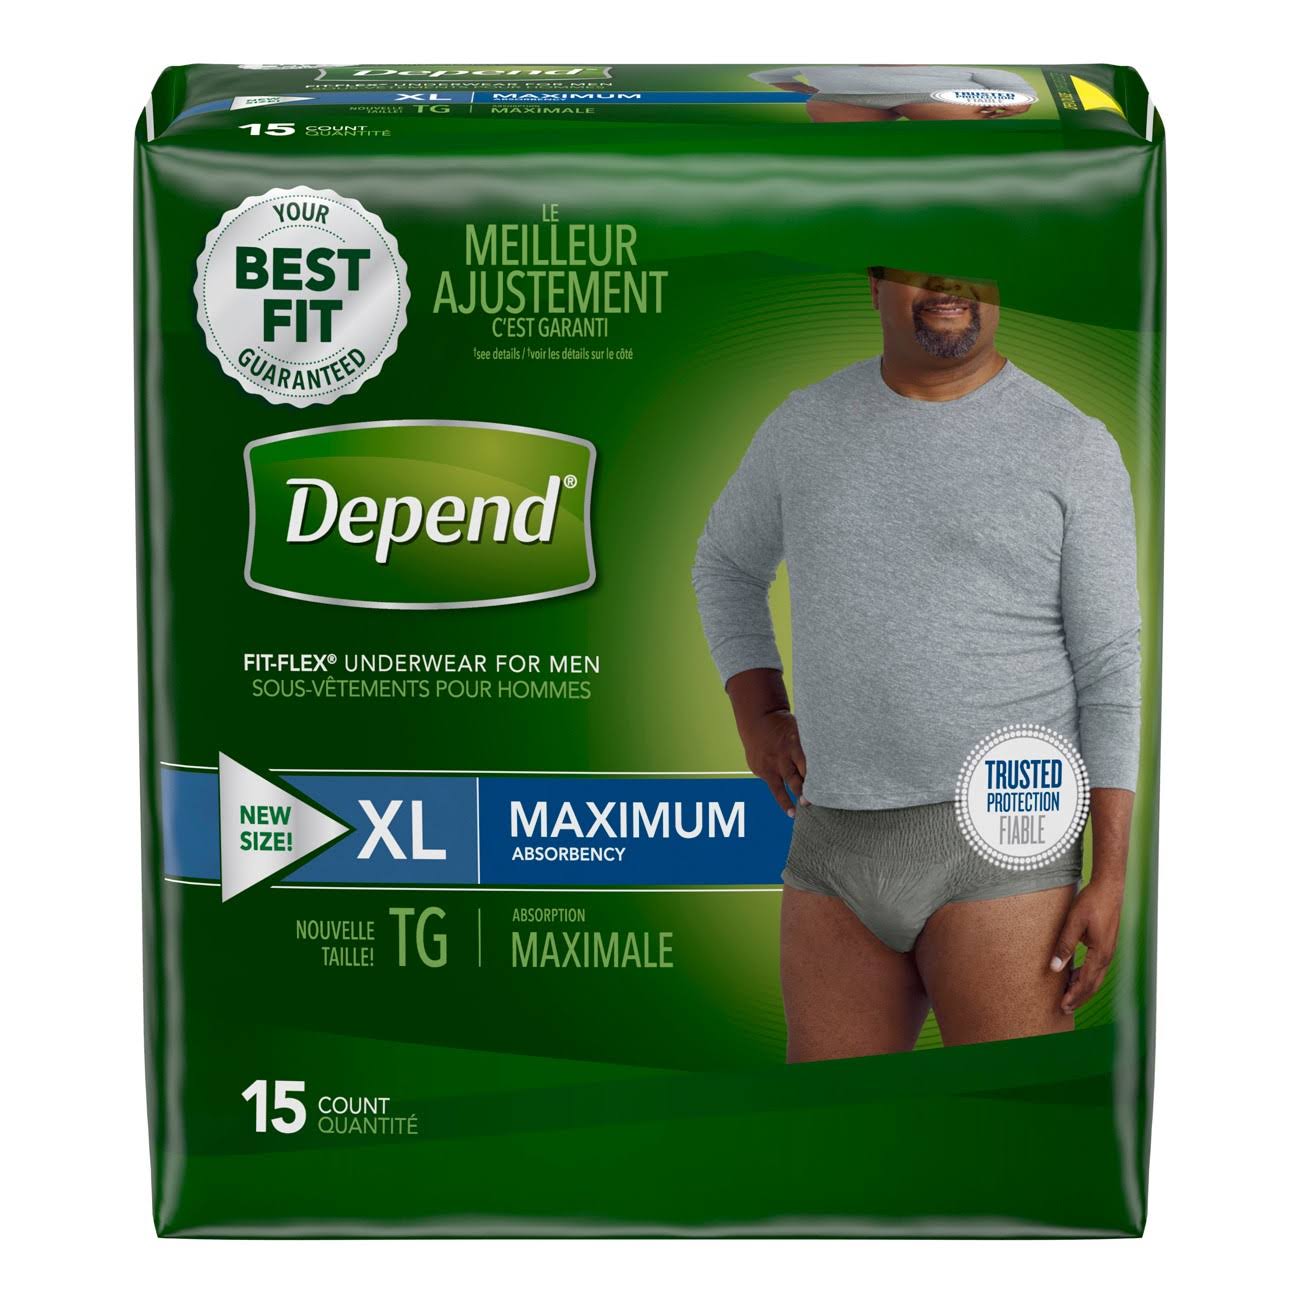 Depend Fit-Flex for Men Incontinence Underwear - Gray, X-Large, 15ct